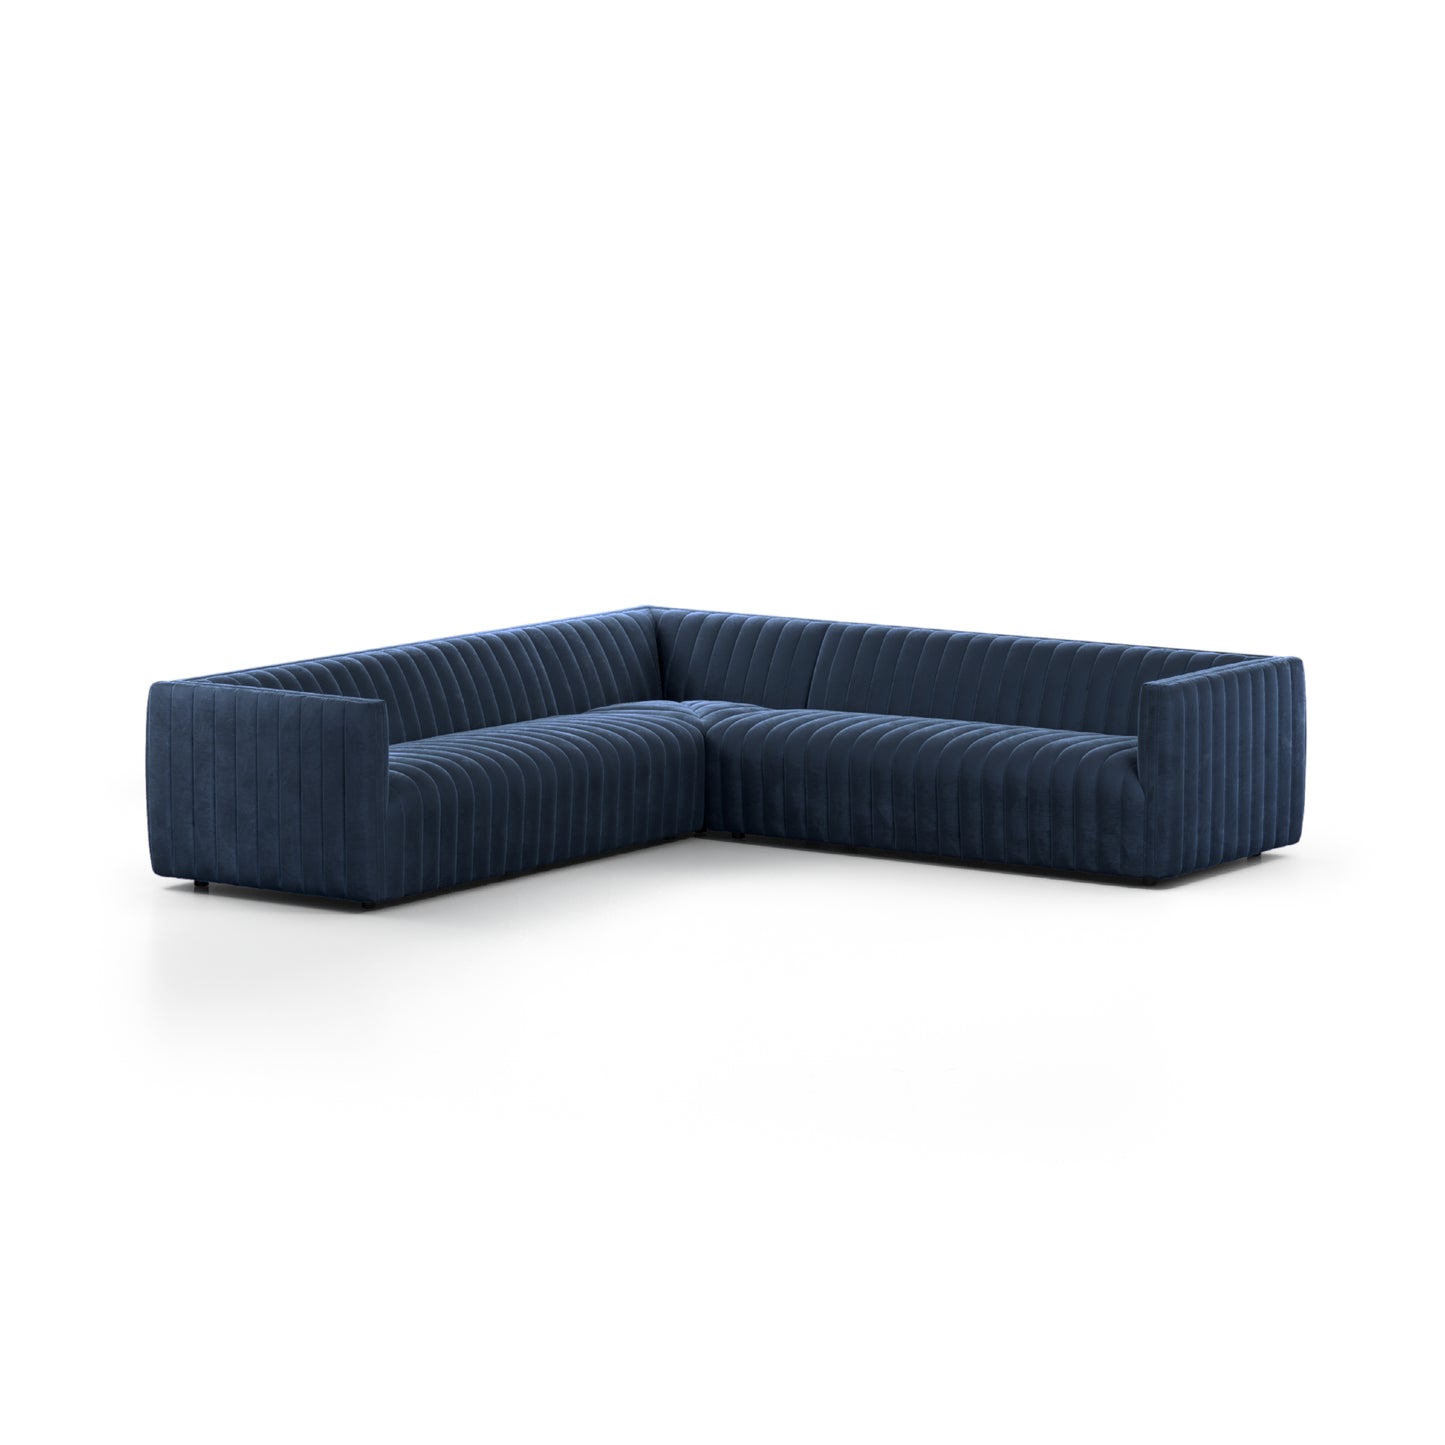 Augustine 3-PC Sectional 105" / Sapphire NavySectional Four Hands  105" Sapphire Navy  Four Hands, Mid Century Modern Furniture, Old Bones Furniture Company, Old Bones Co, Modern Mid Century, Designer Furniture, https://www.oldbonesco.com/